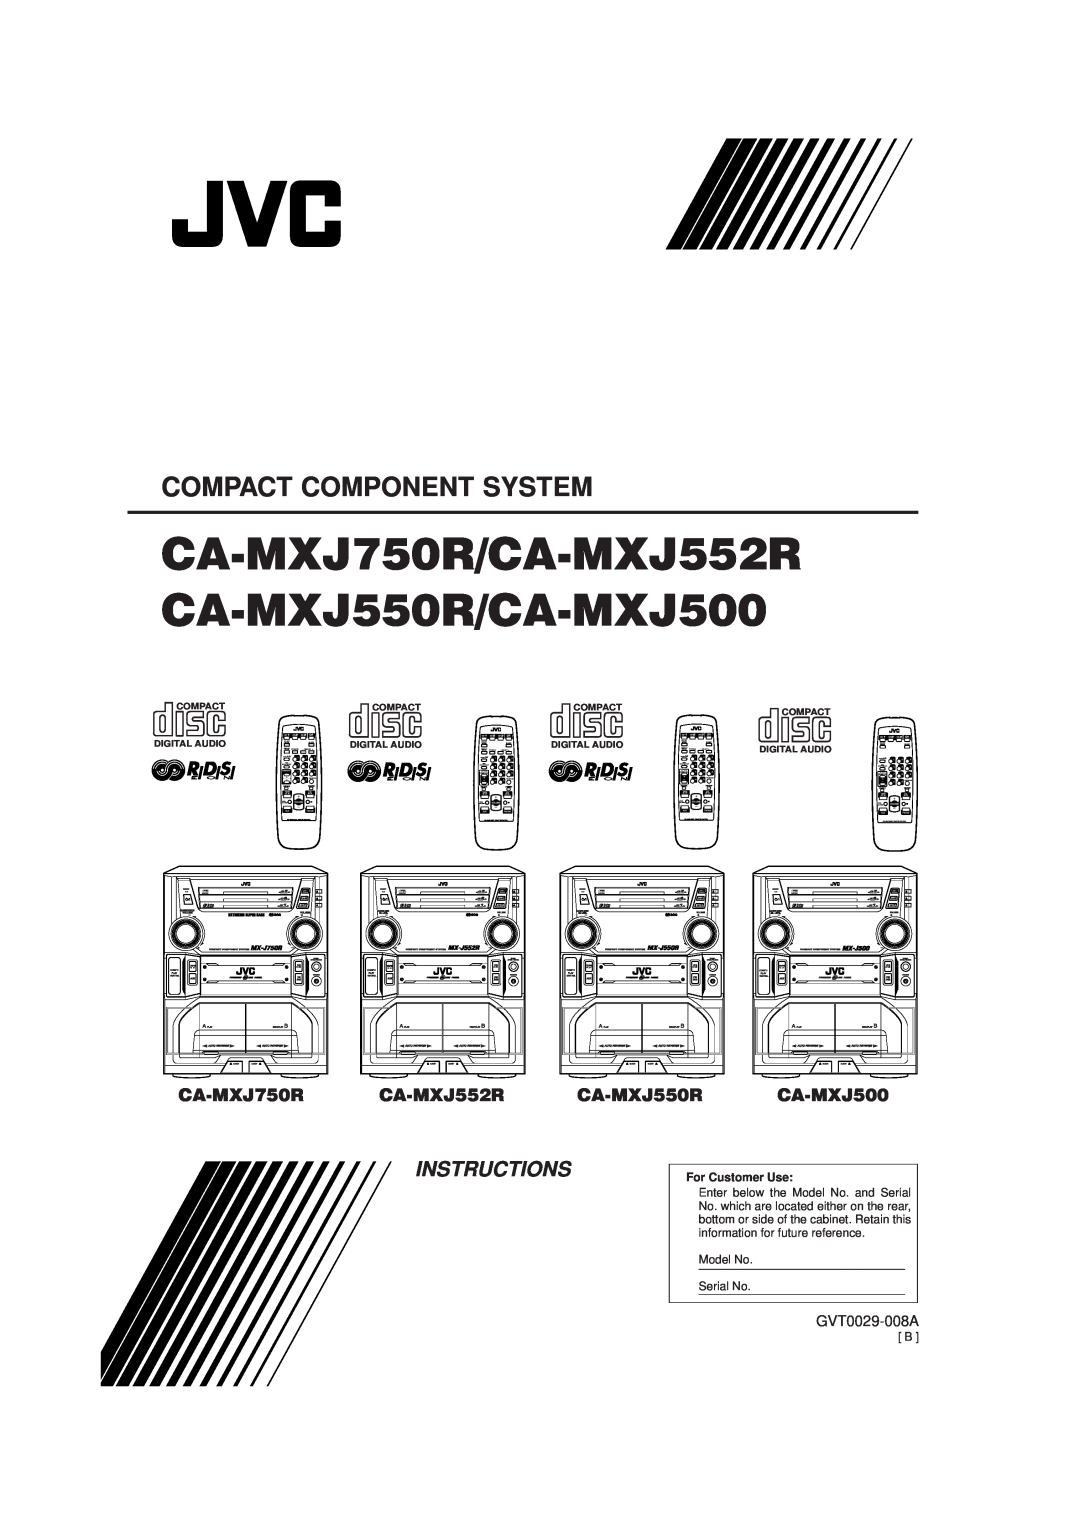 JVC manual CA-MXJ750R/CA-MXJ552R CA-MXJ550R/CA-MXJ500, Compact Component System, Instructions, GVT0029-008A 